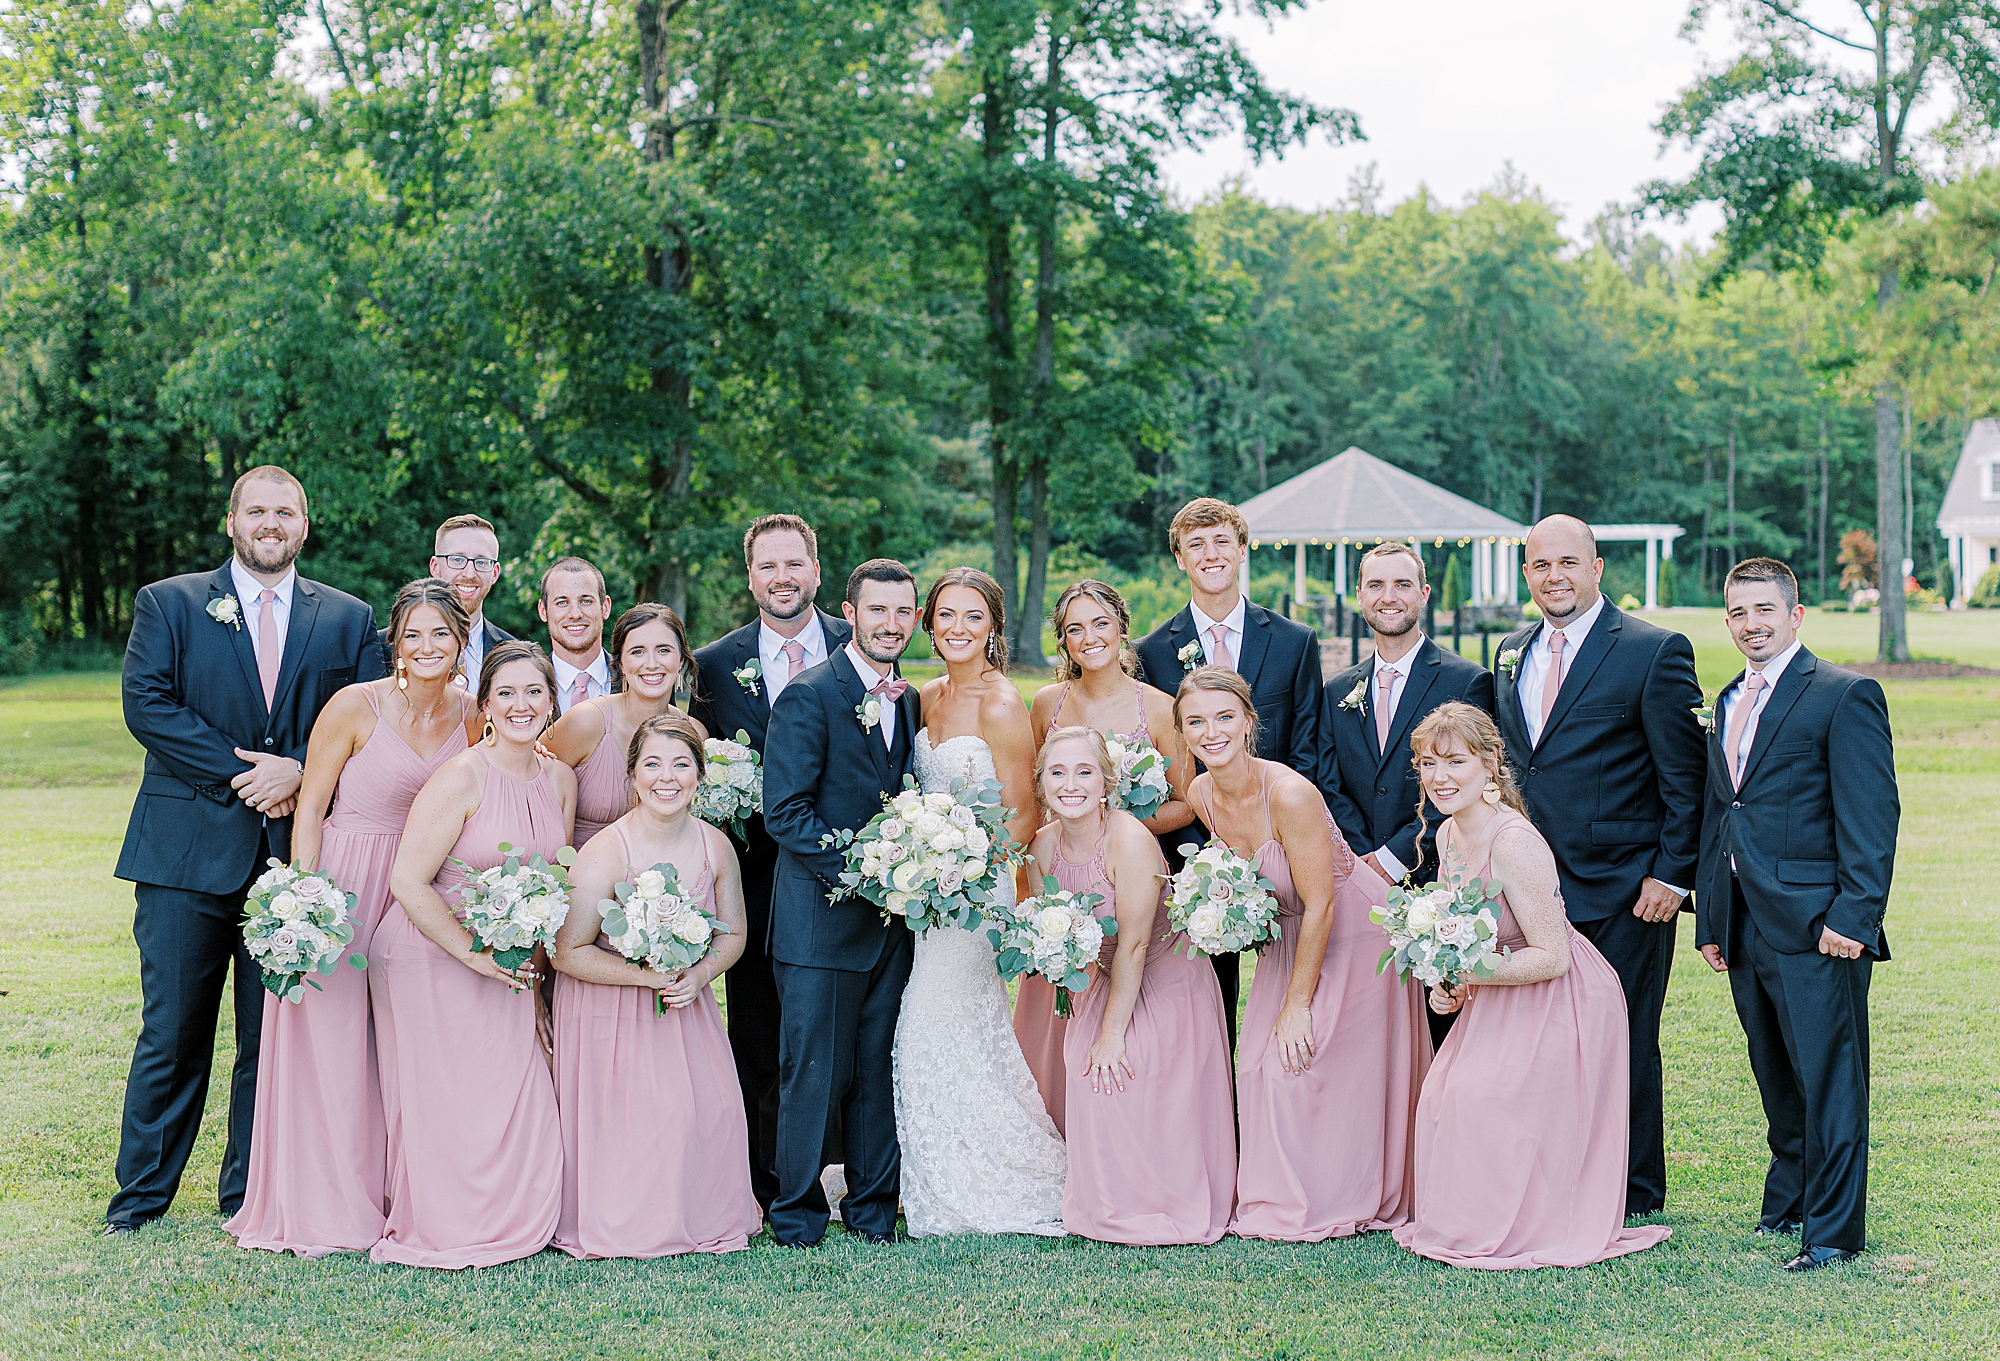 Group photo of bridal party in Richmond, Virginia.